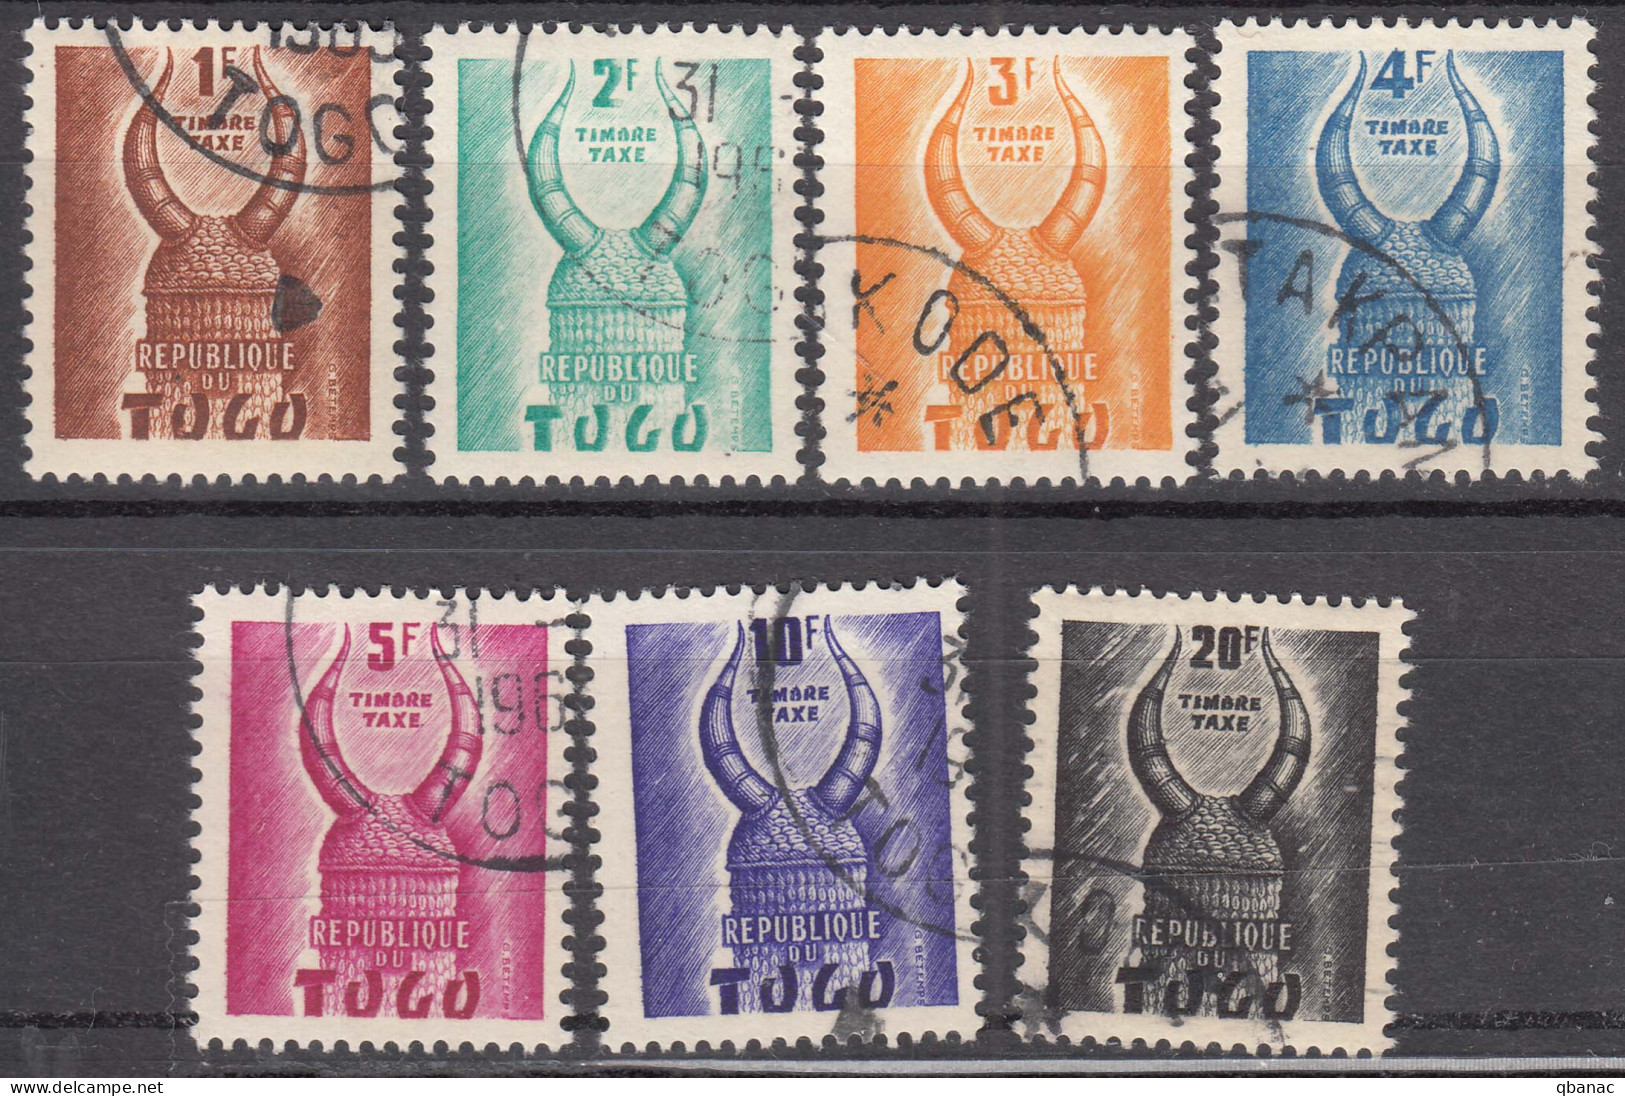 Togo 1959 Timbre Taxe Mi#55-61 Used - Used Stamps